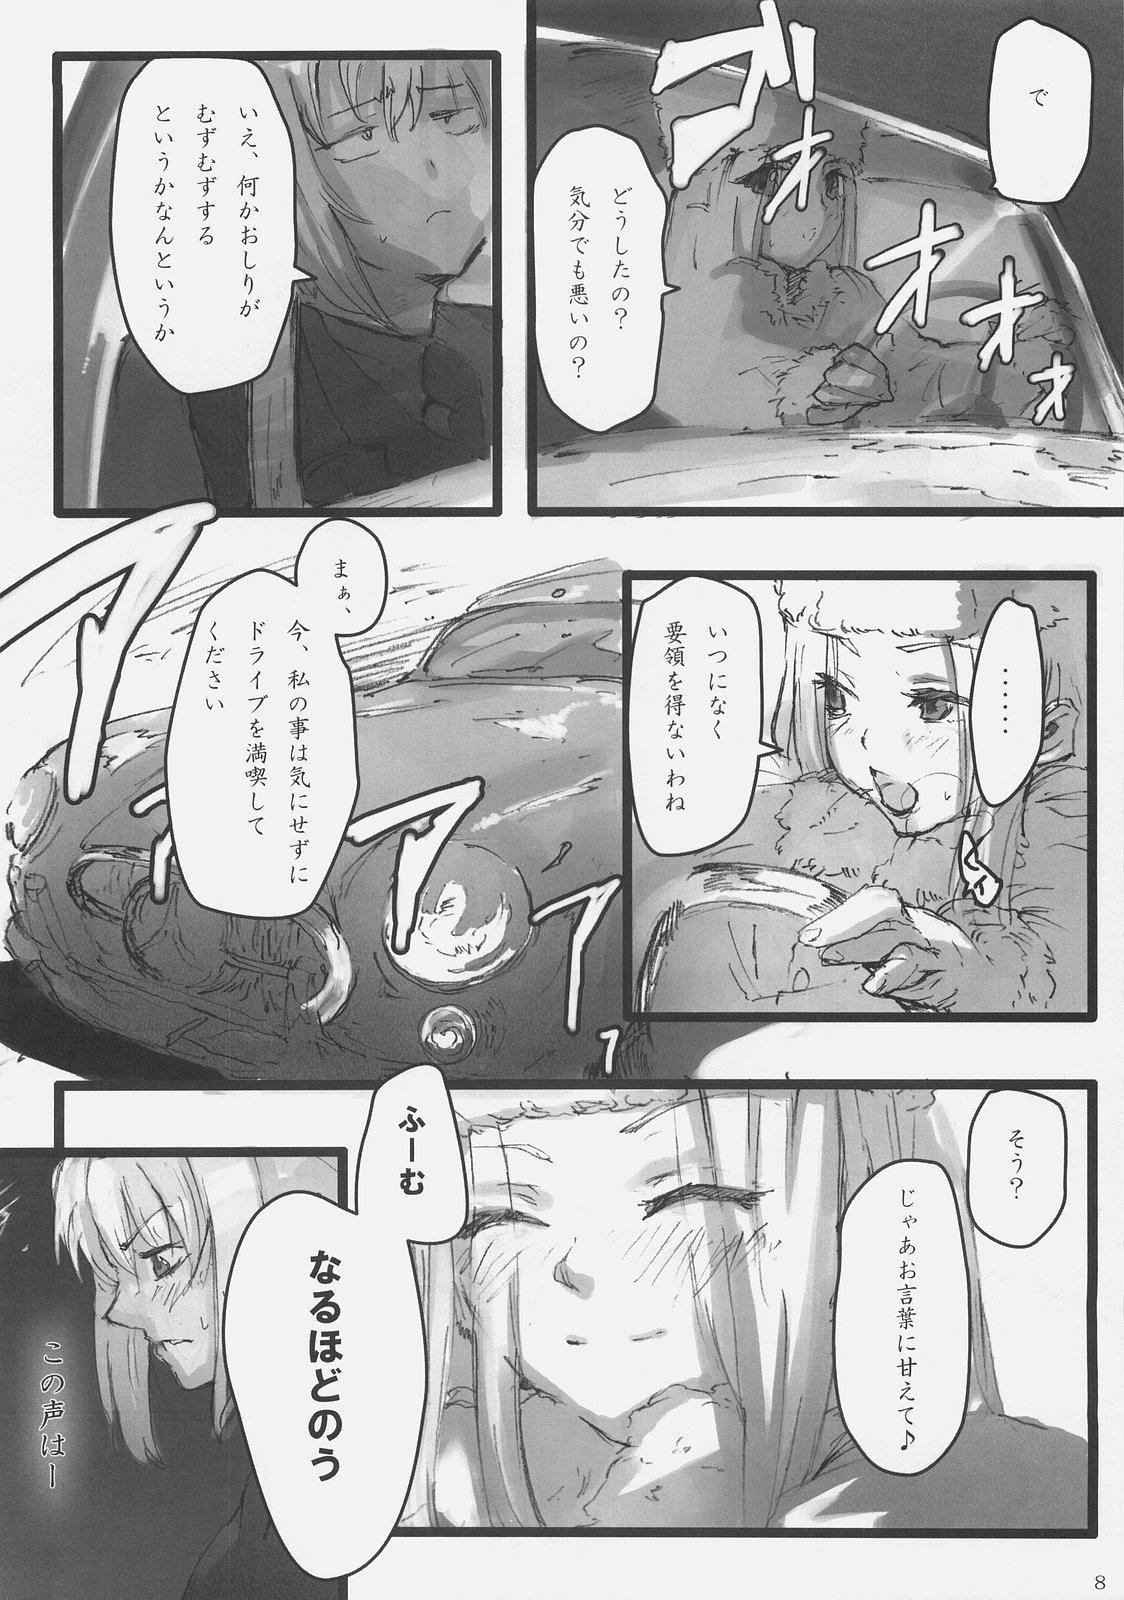 Young Concerto - Fate stay night Fate zero Moyashimon Bdsm - Page 7